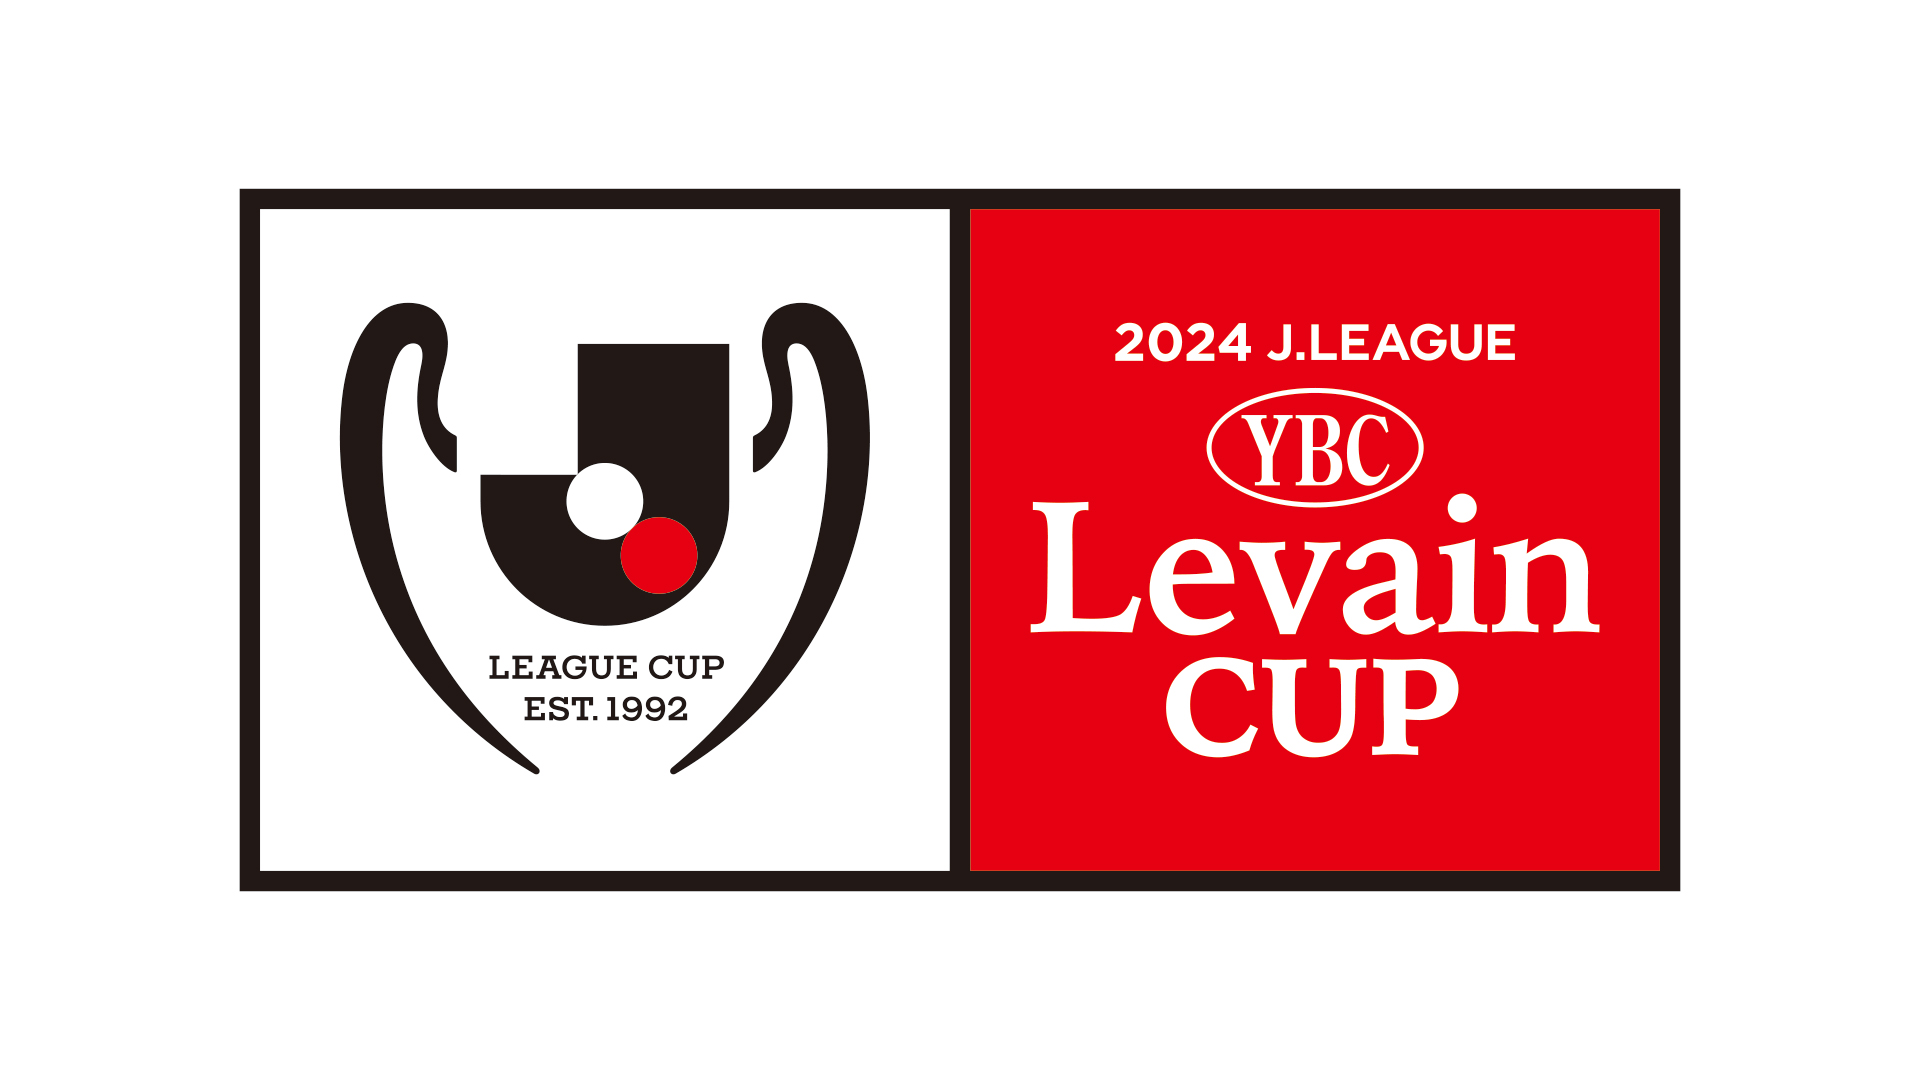 YBC Levain Cup 1st Round 3rd Round Kickoff time and stadium announced